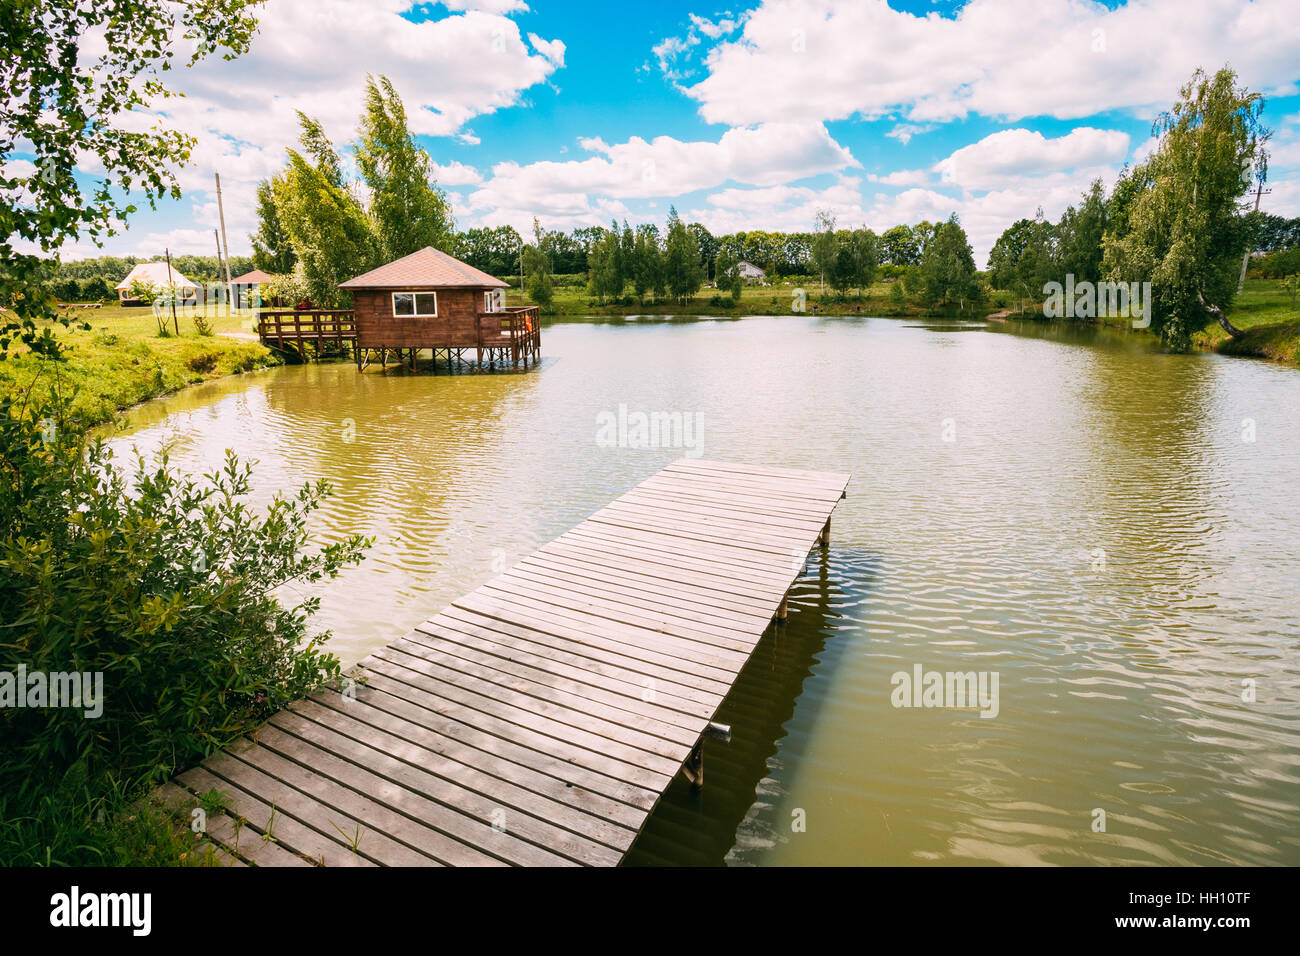 Old Wooden Pier For Fishing, Small House On Small Lake Or River